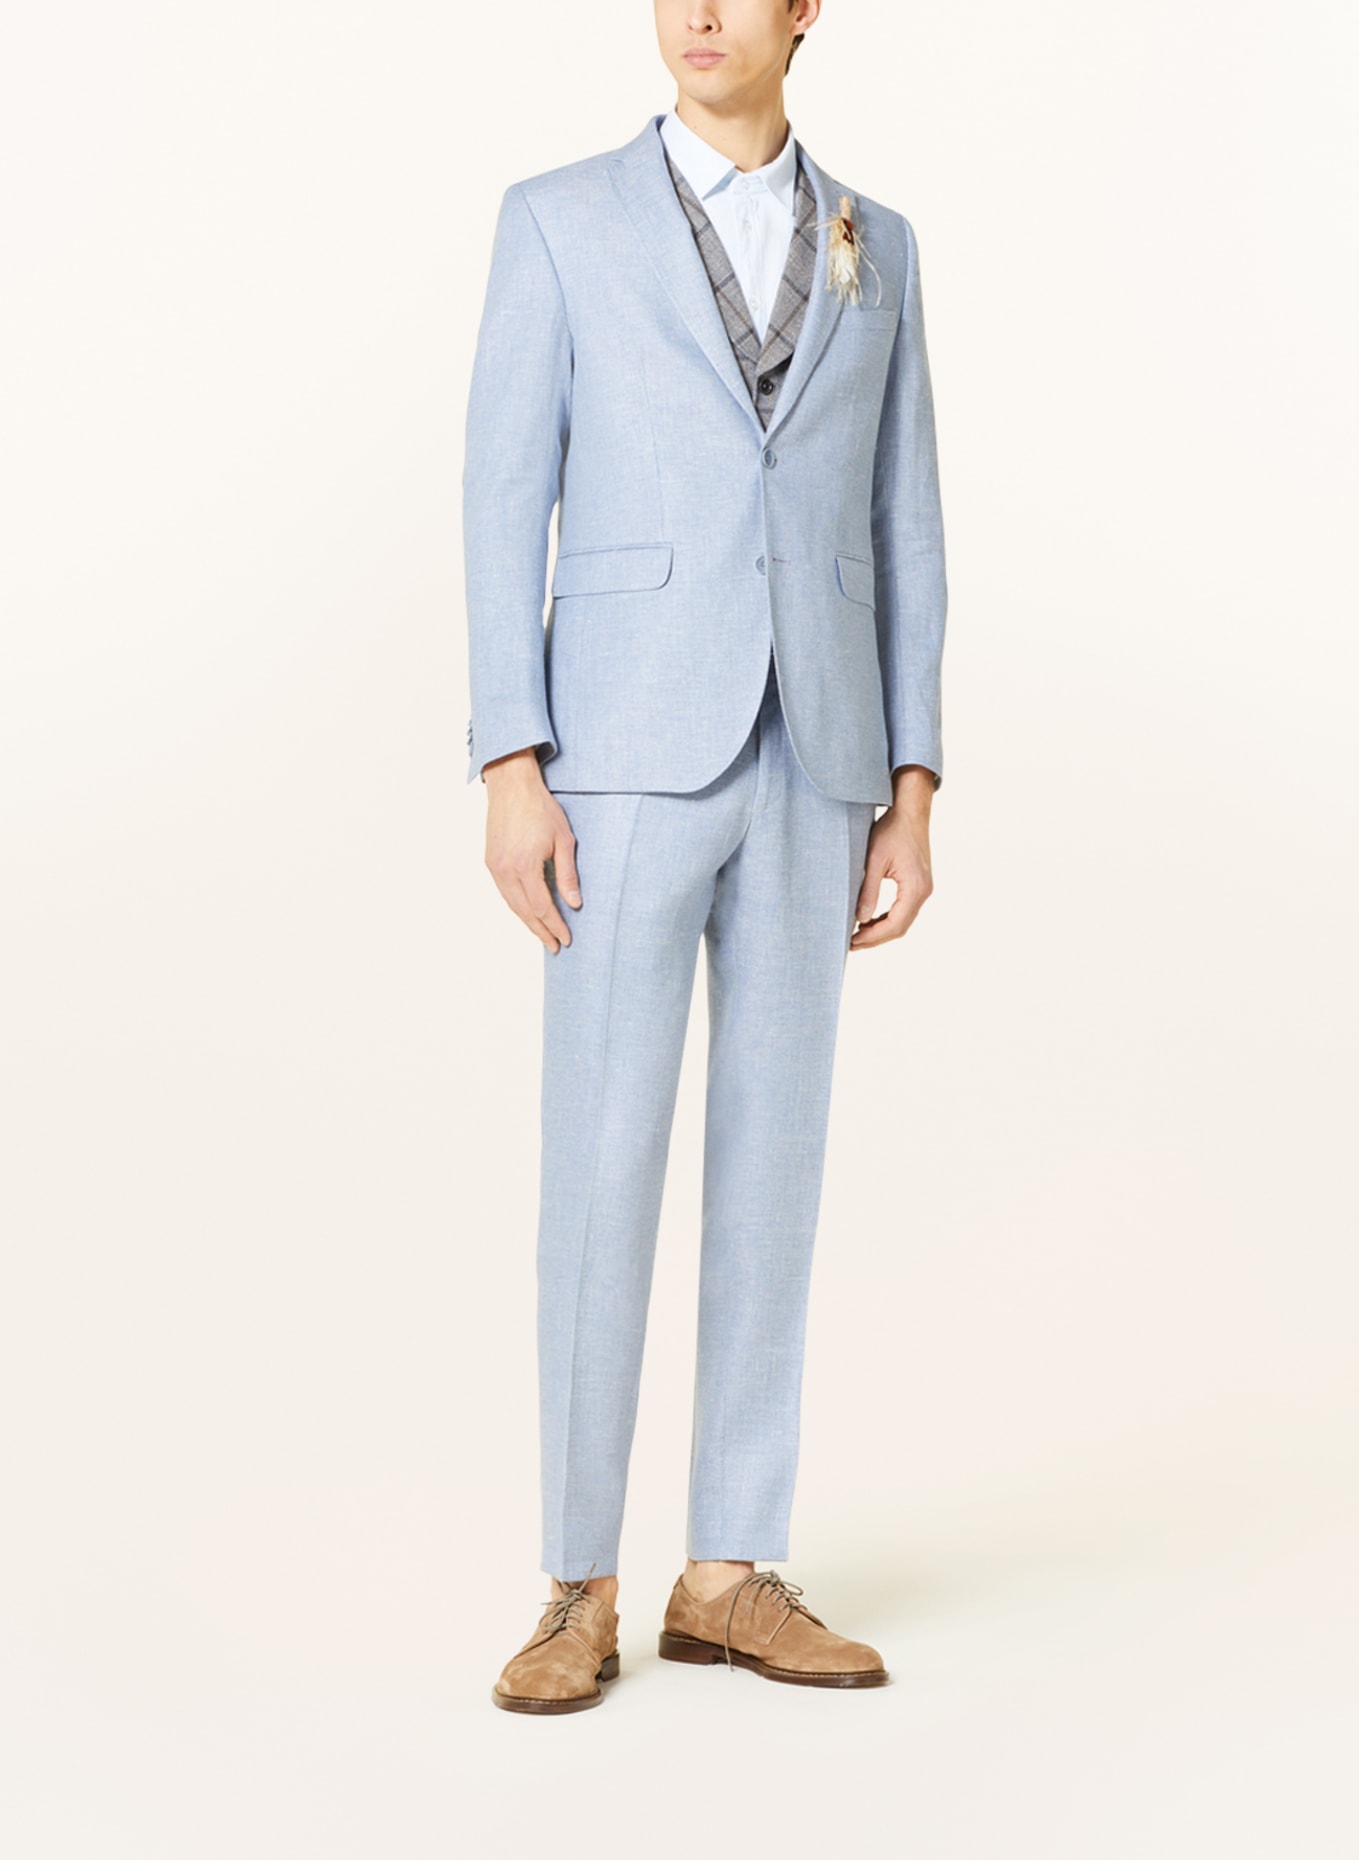 CG - CLUB of GENTS Suit jacket CG PAUL slim fit with linen, Color: 61 BLAU HELL (Image 3)